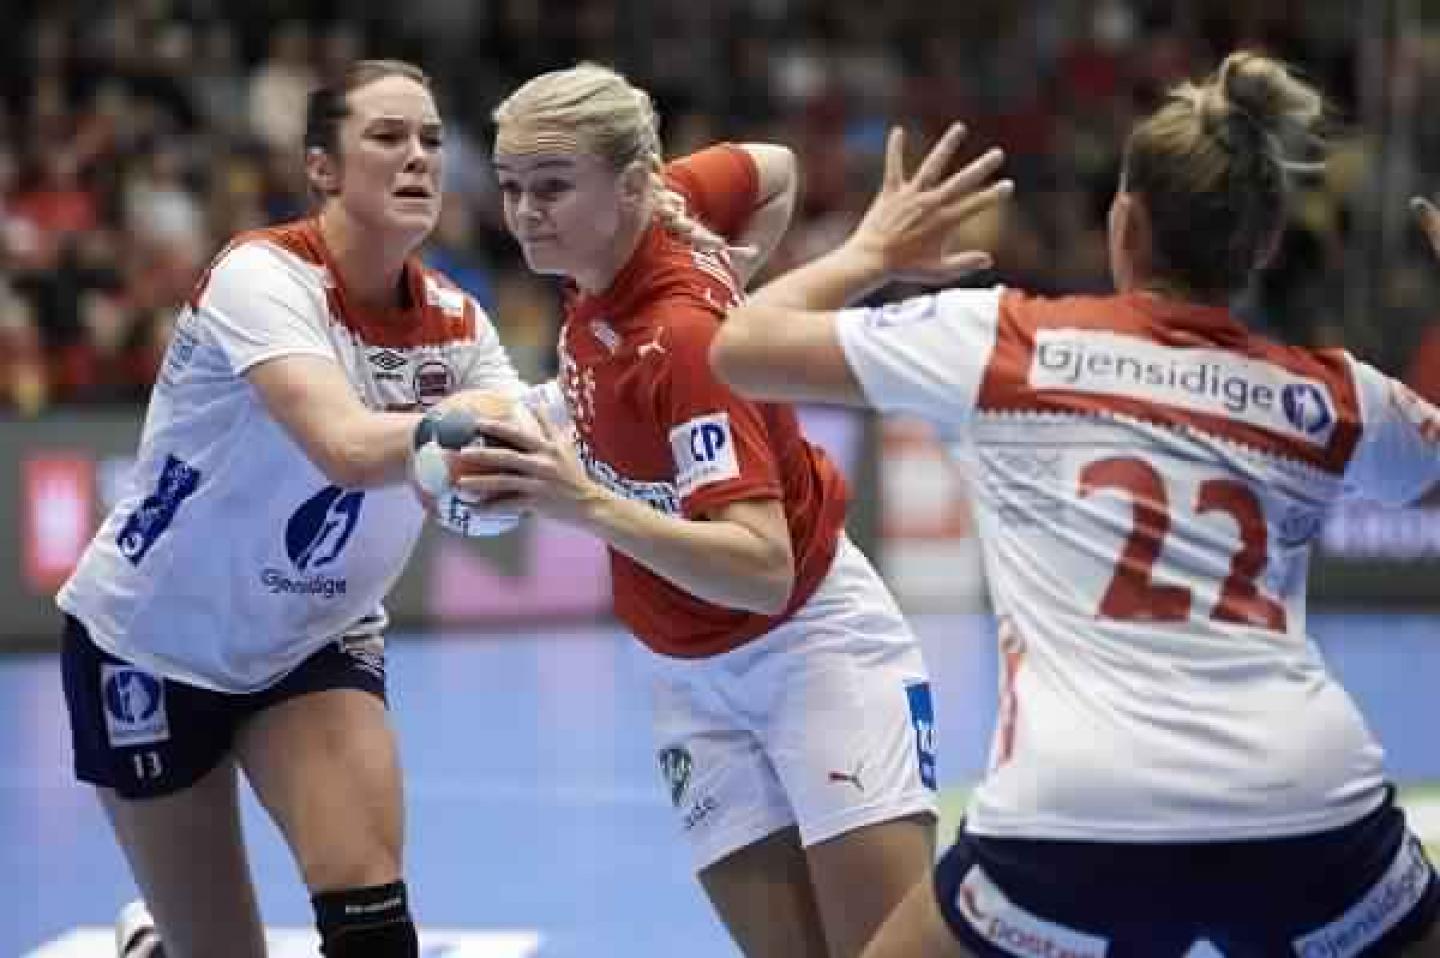 Norway win first Golden League tournament of the season